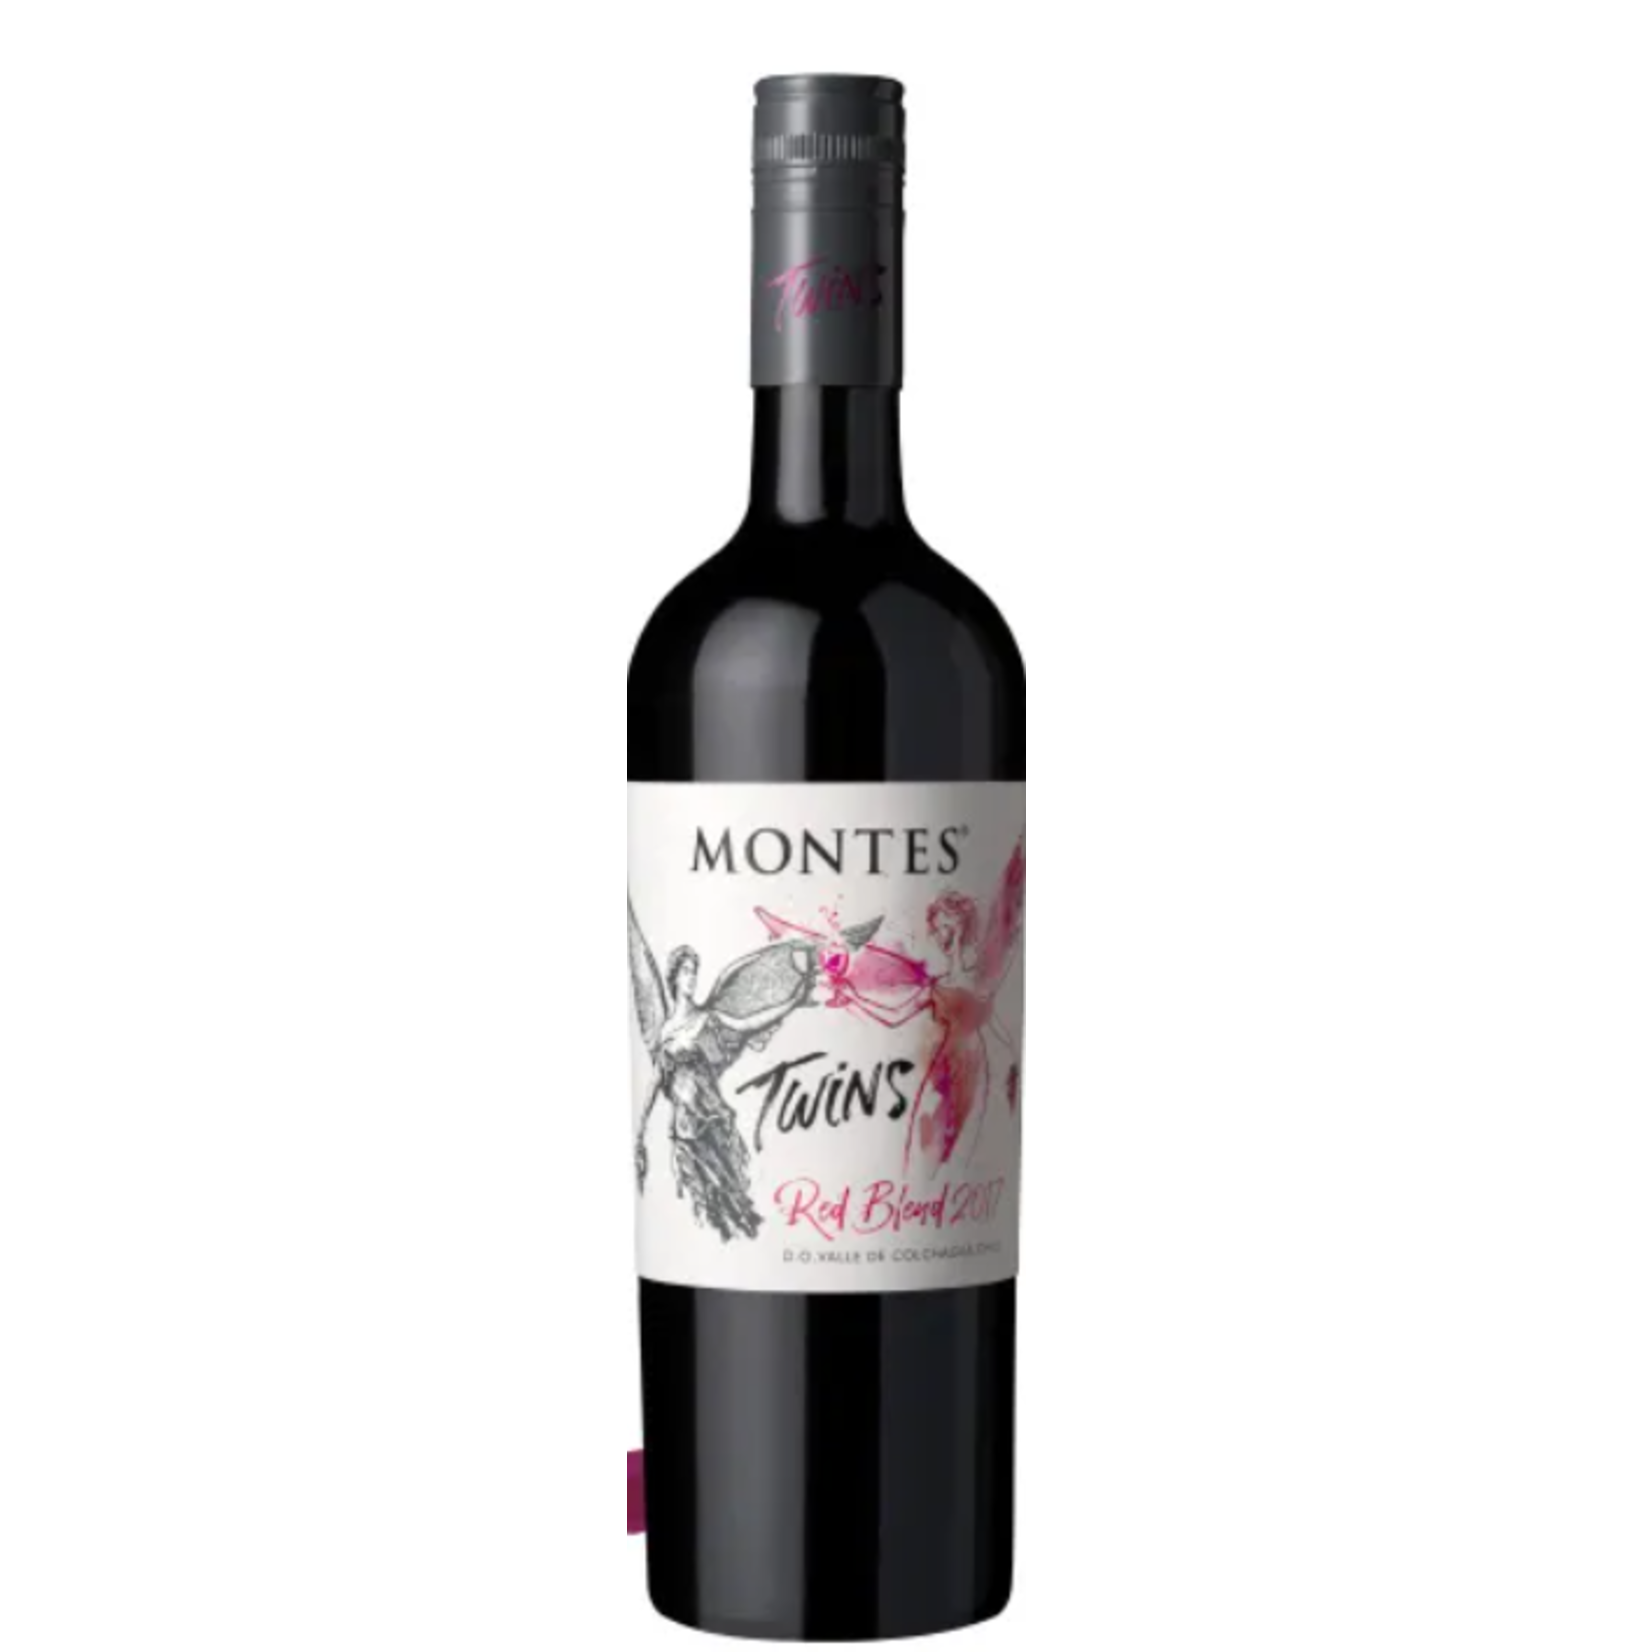 Montes Wines Montes Twins Red Blend Chile